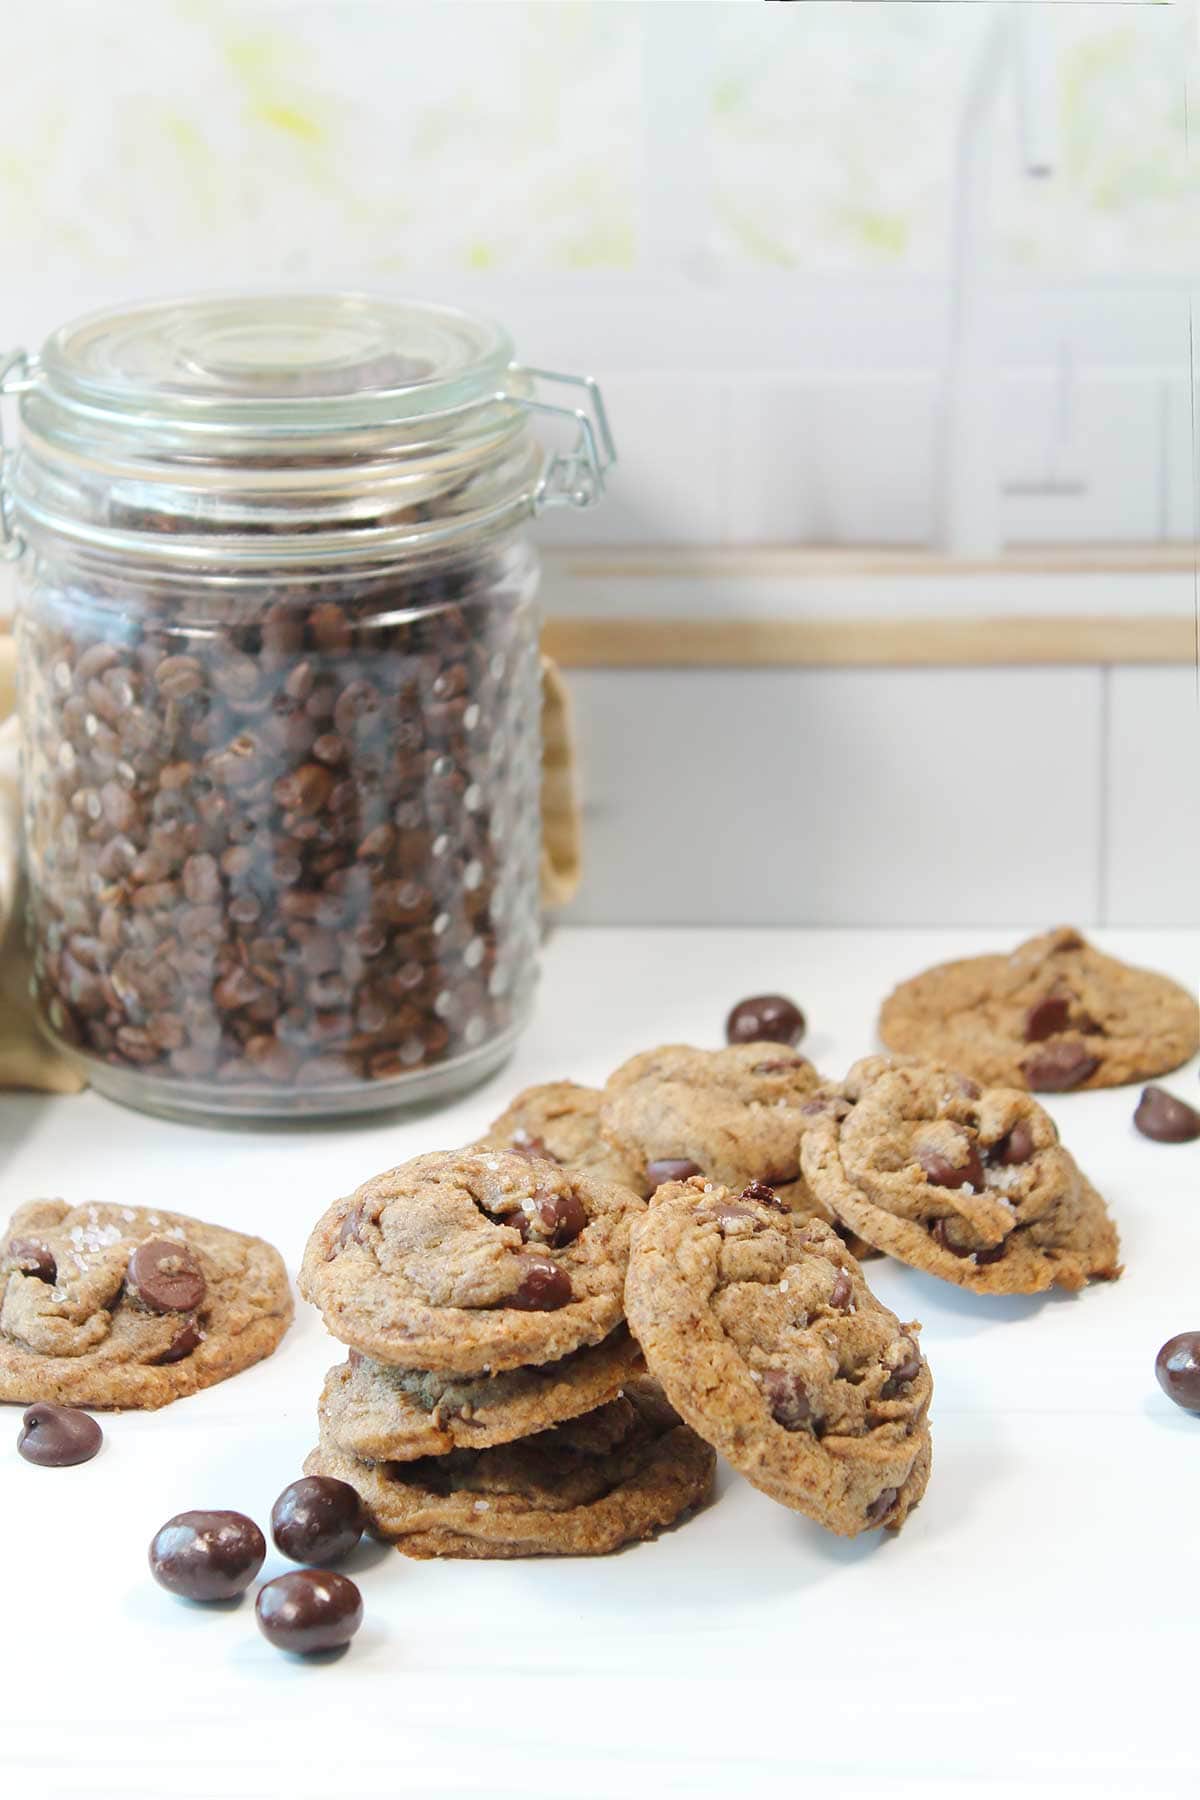 Stack of espresso chocolate chip cookies by jar of coffee beans.